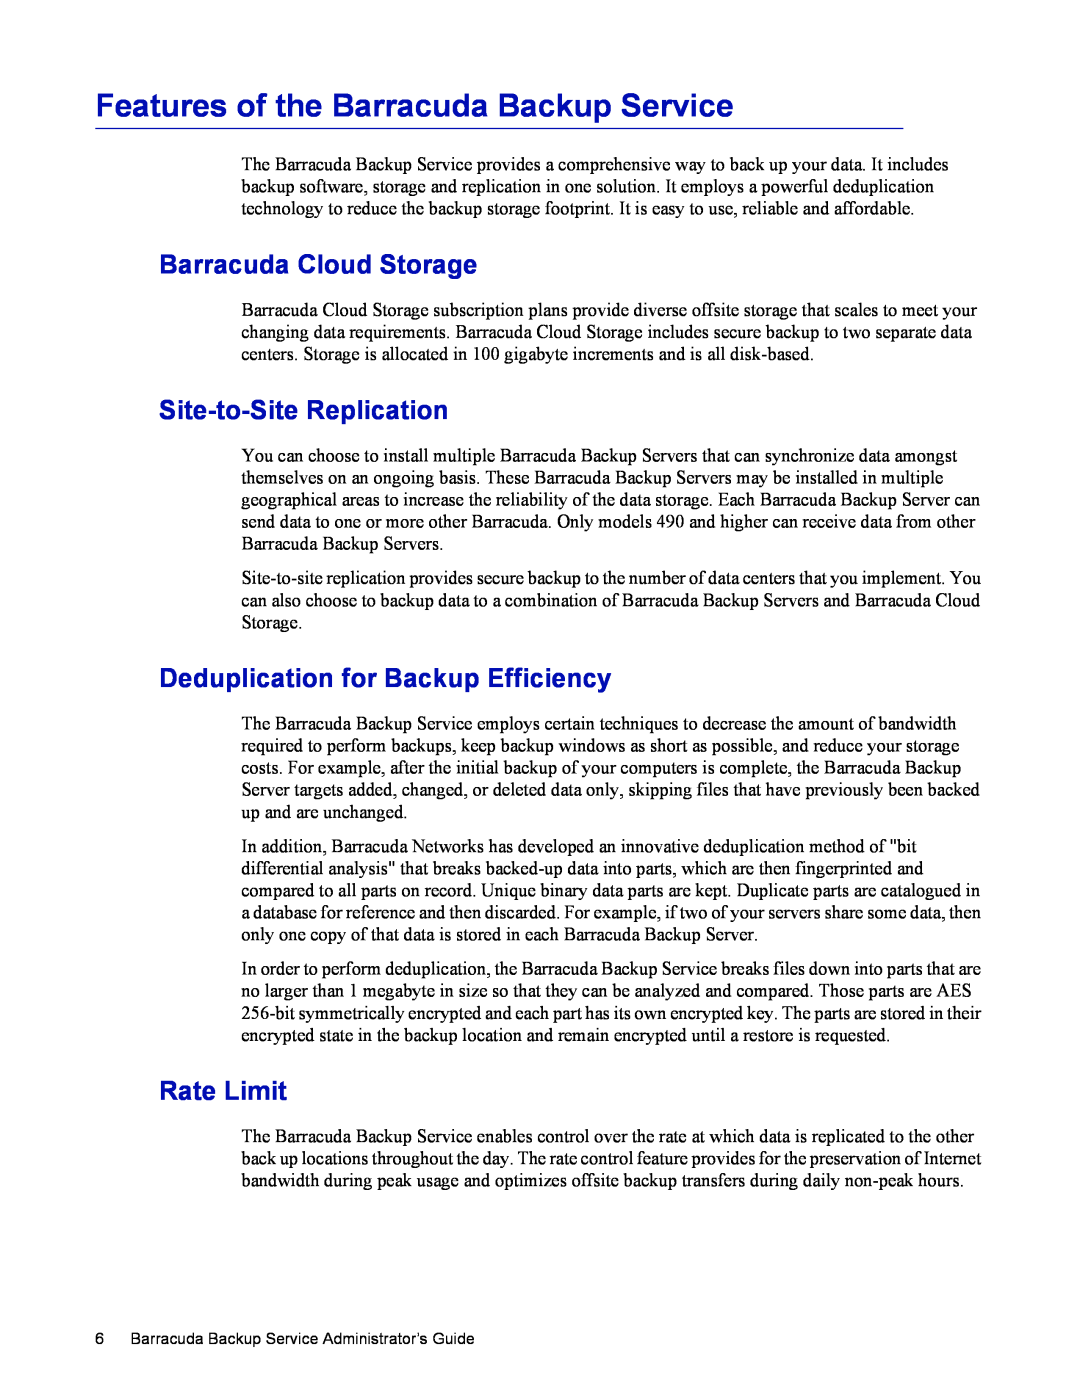 Barracuda Networks 4 manual Features of the Barracuda Backup Service, Barracuda Cloud Storage, Site-to-Site Replication 